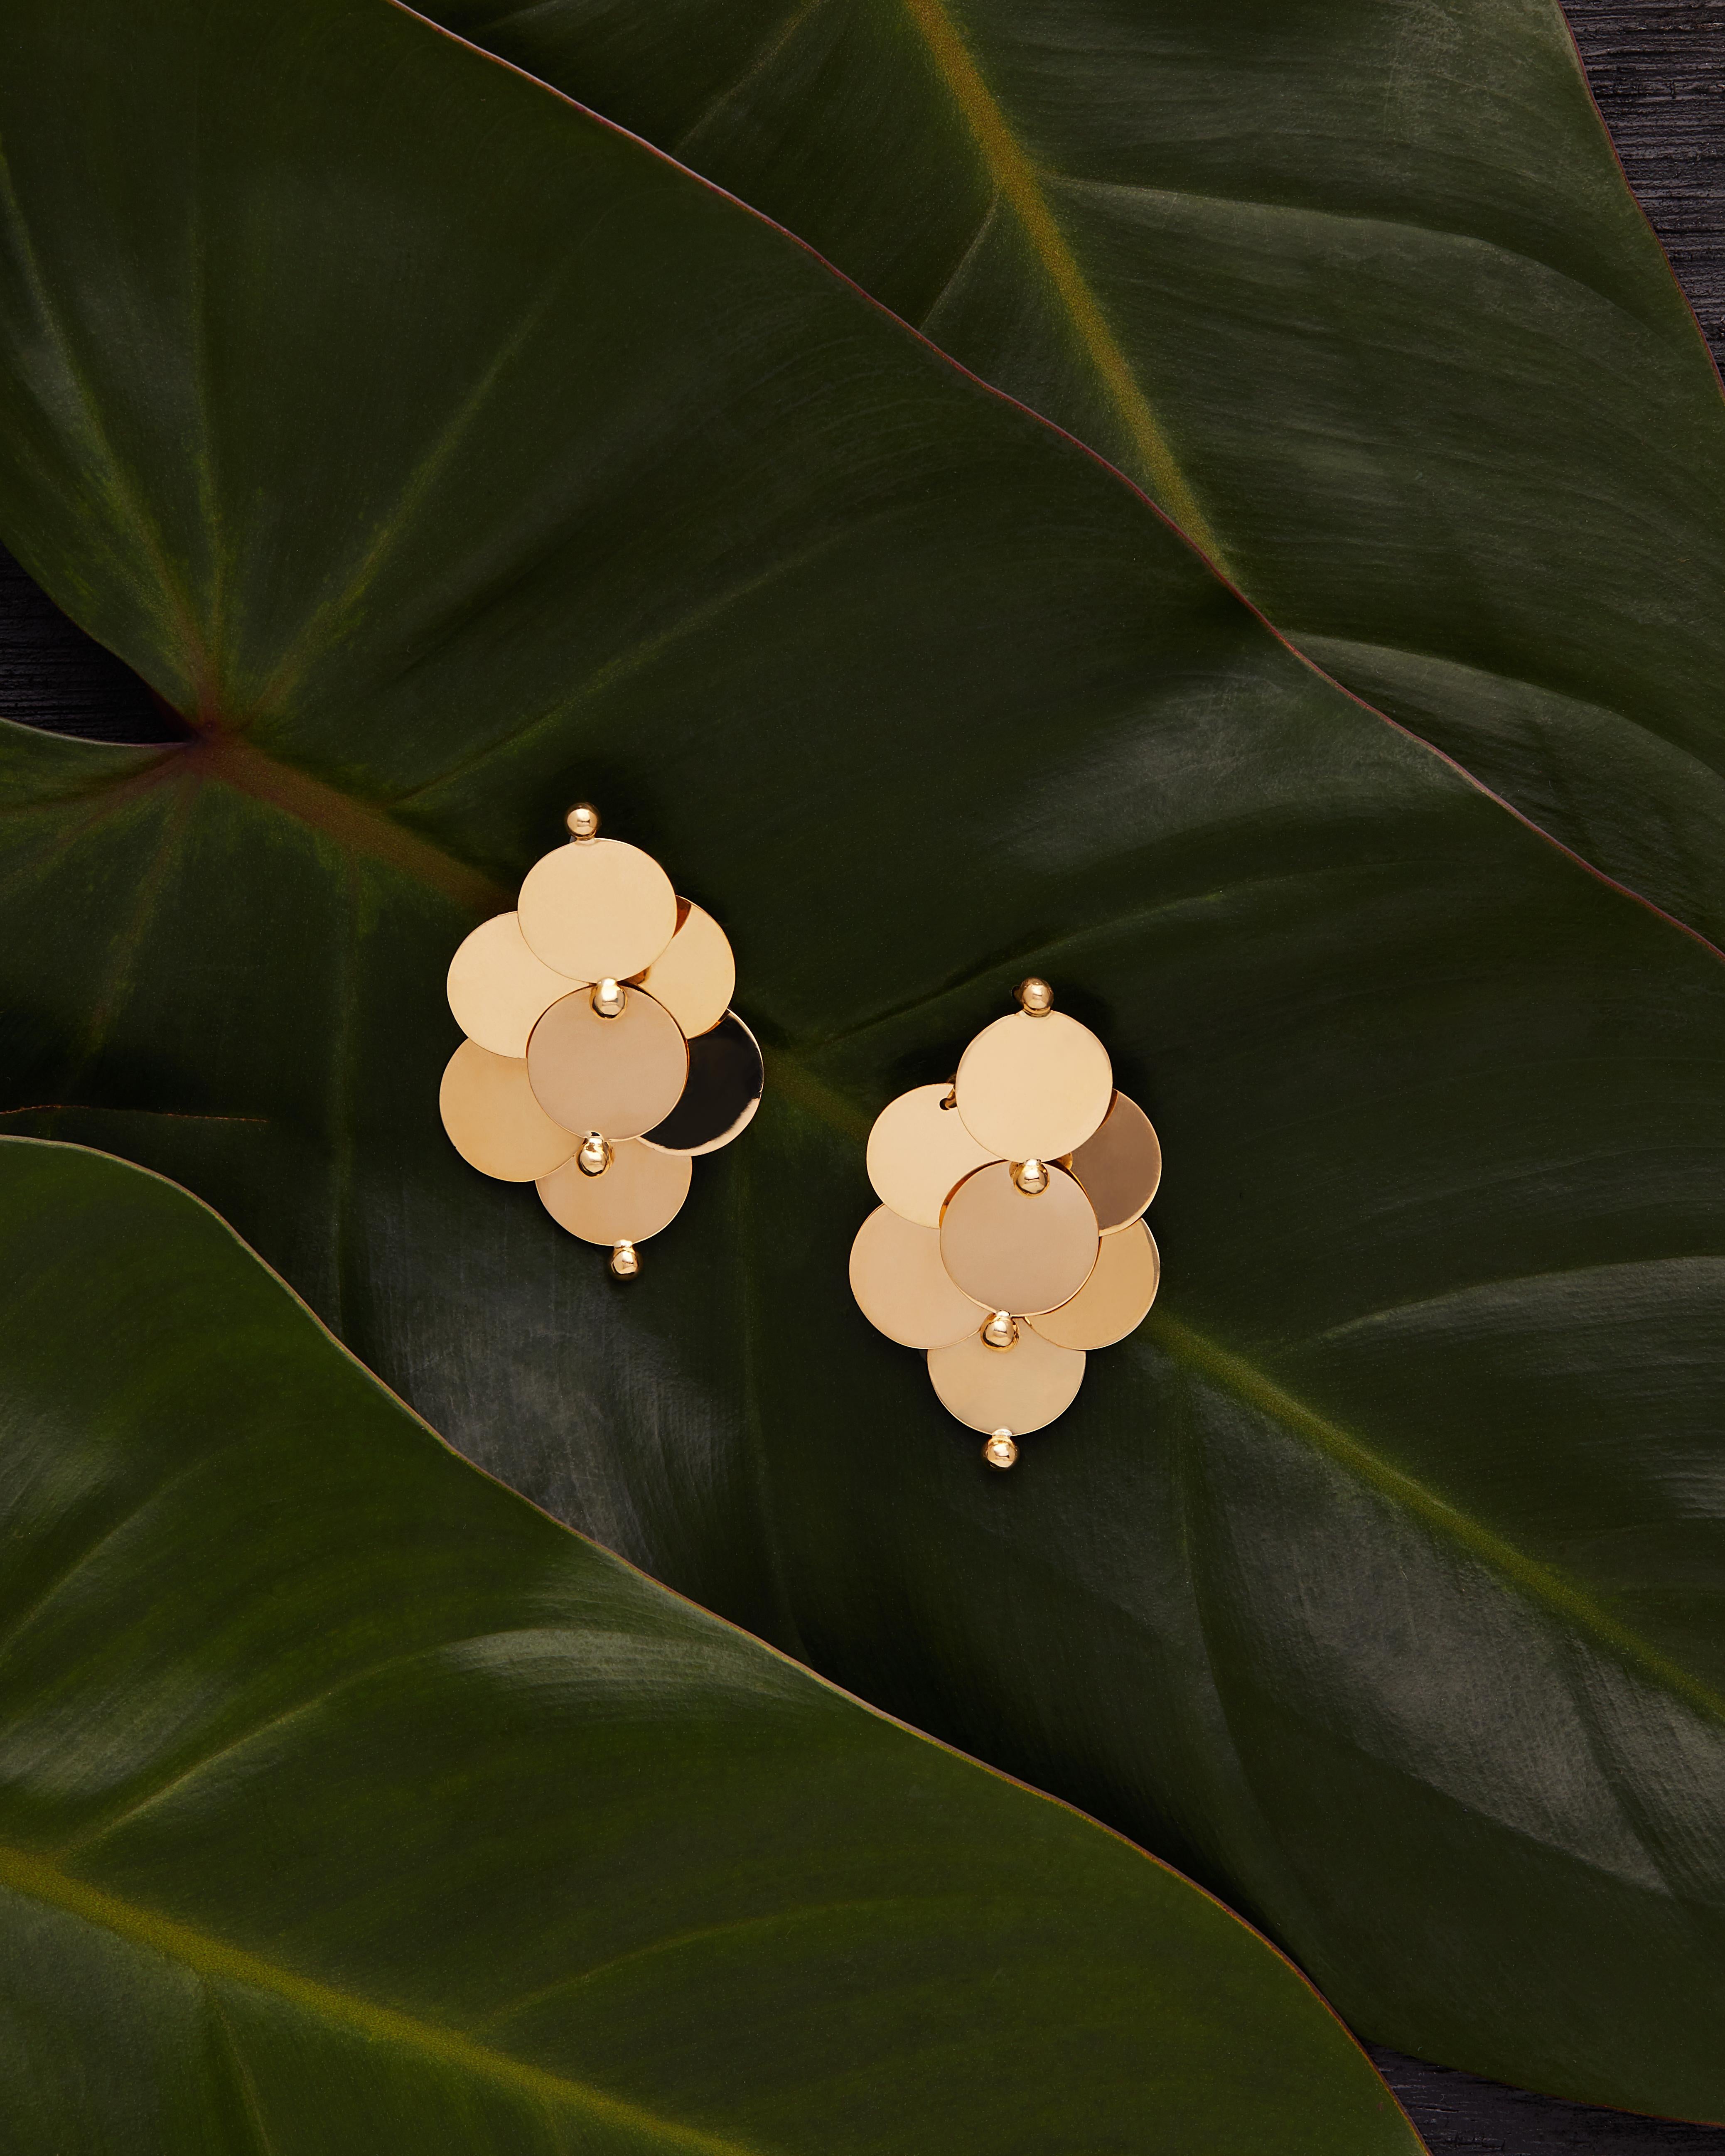 Designer: William Spratling 

The timeless and elegant Dancing Disc earrings were originally designed by Jeweler William Spratling, and are just as fresh and modern today as they were when they were first created 70 years ago.

Handcrafted today in